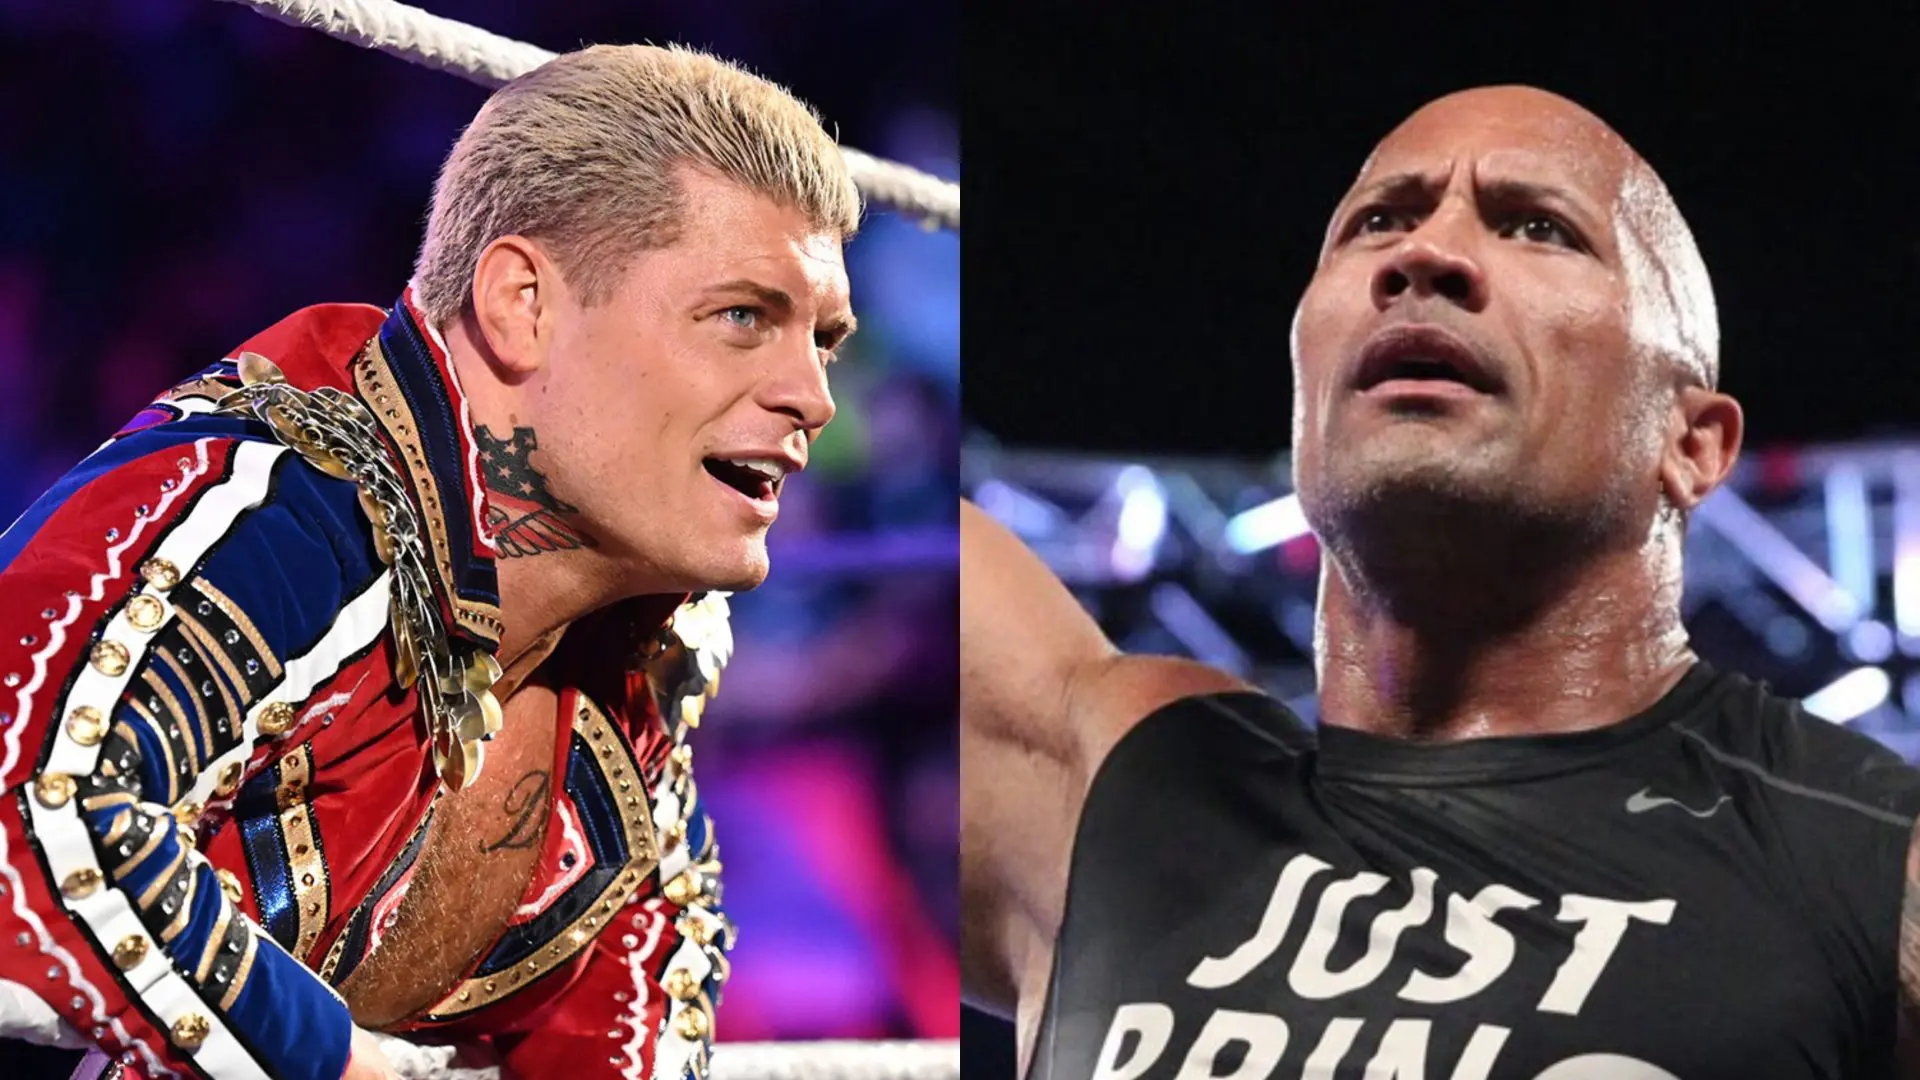 Shock and Awe: The Rock's Daring Promise Shakes Up WrestleMania Hype – Inside the Heated Feud with Cody Rhodes